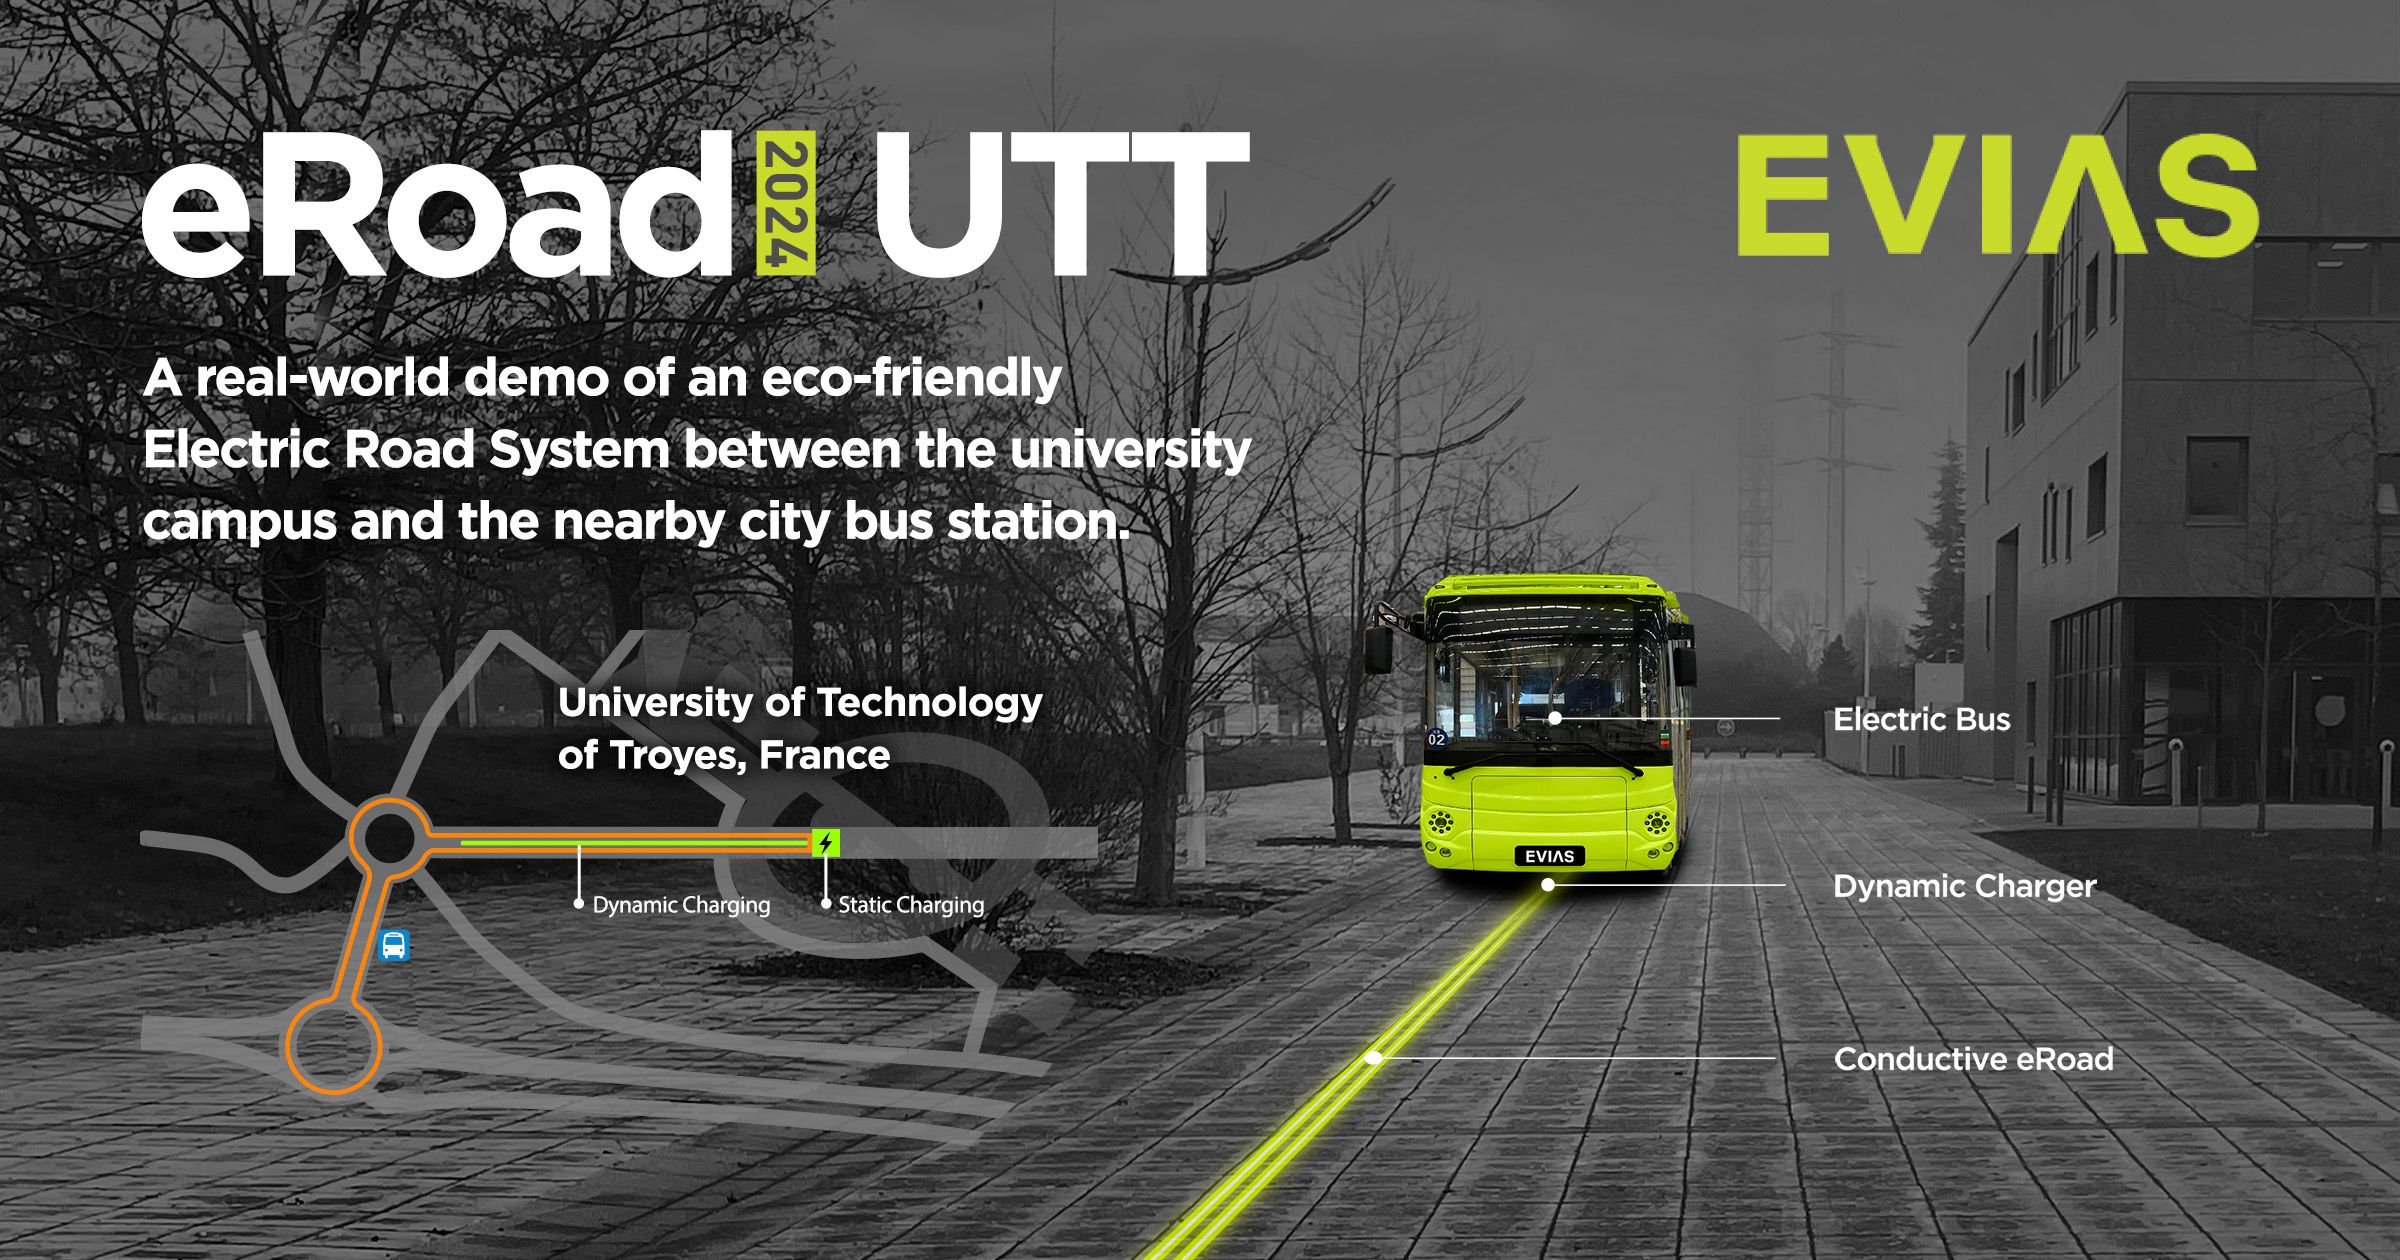 A real-world demo of an eco-friendly Electric Road System between the campus of University of Technology of Troyes, France and the nearby city bus station.